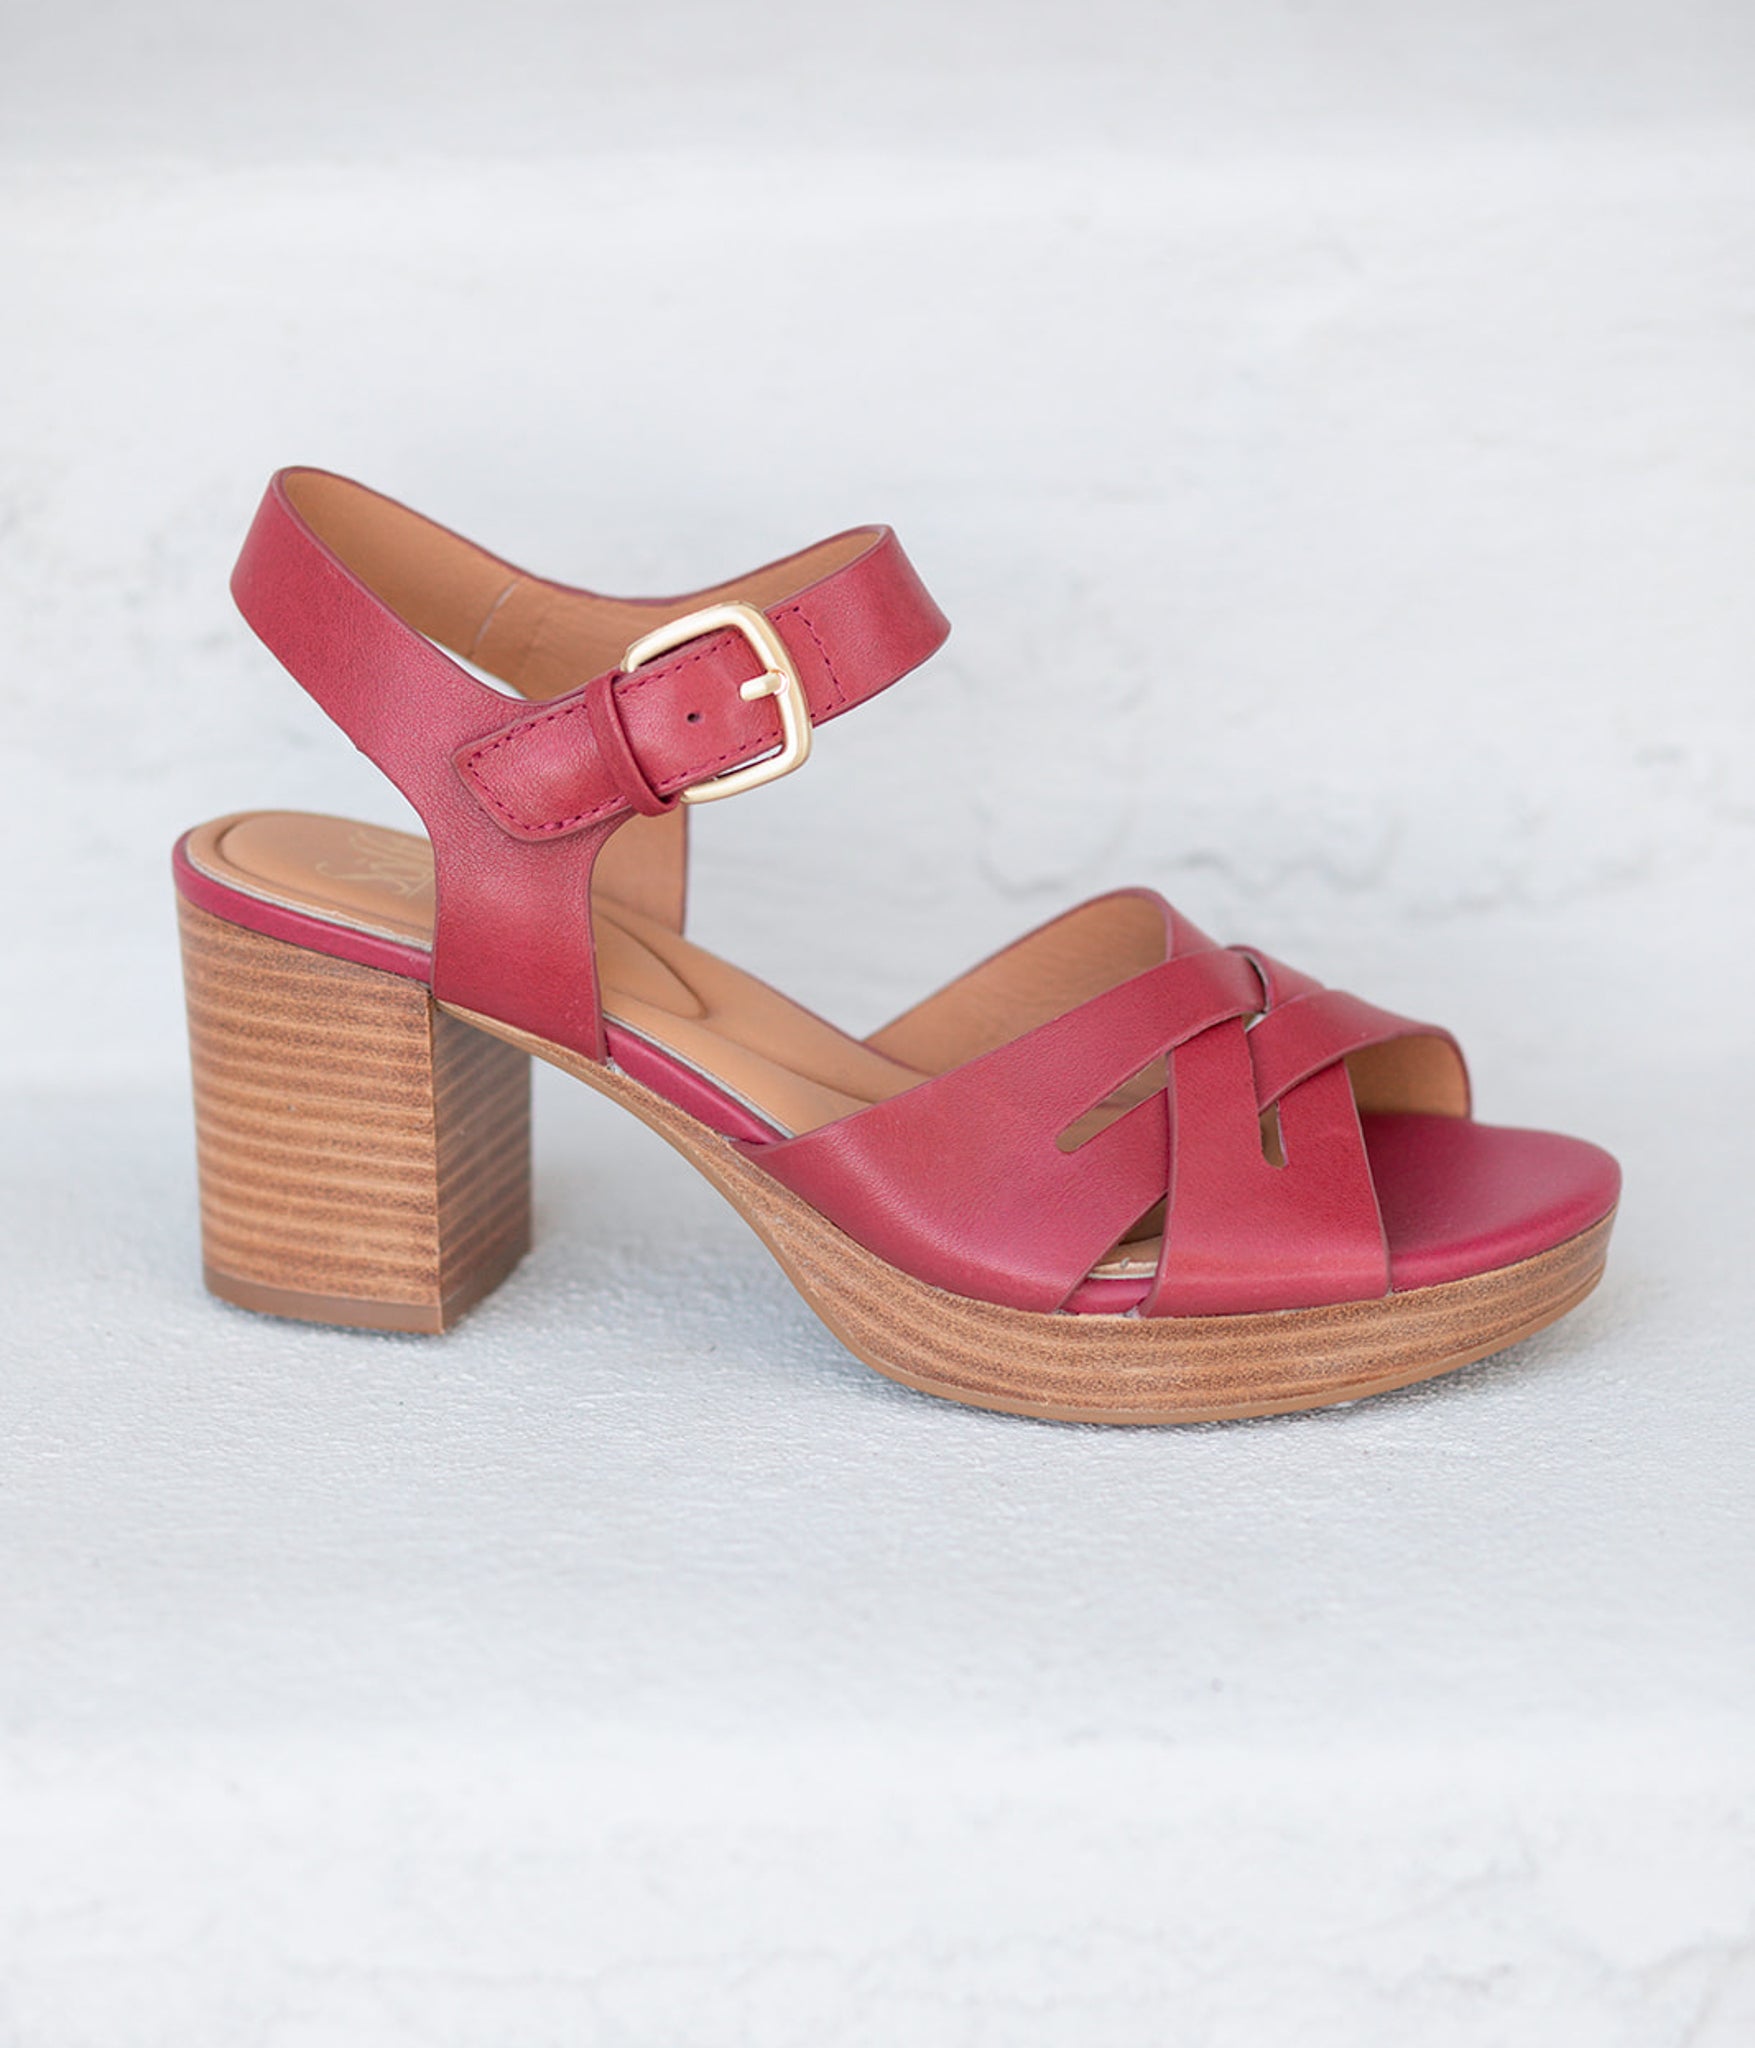 Lacie Italian Leather Heeled Platform Sandal in Pink Red Raspberry by Sofft Shoes